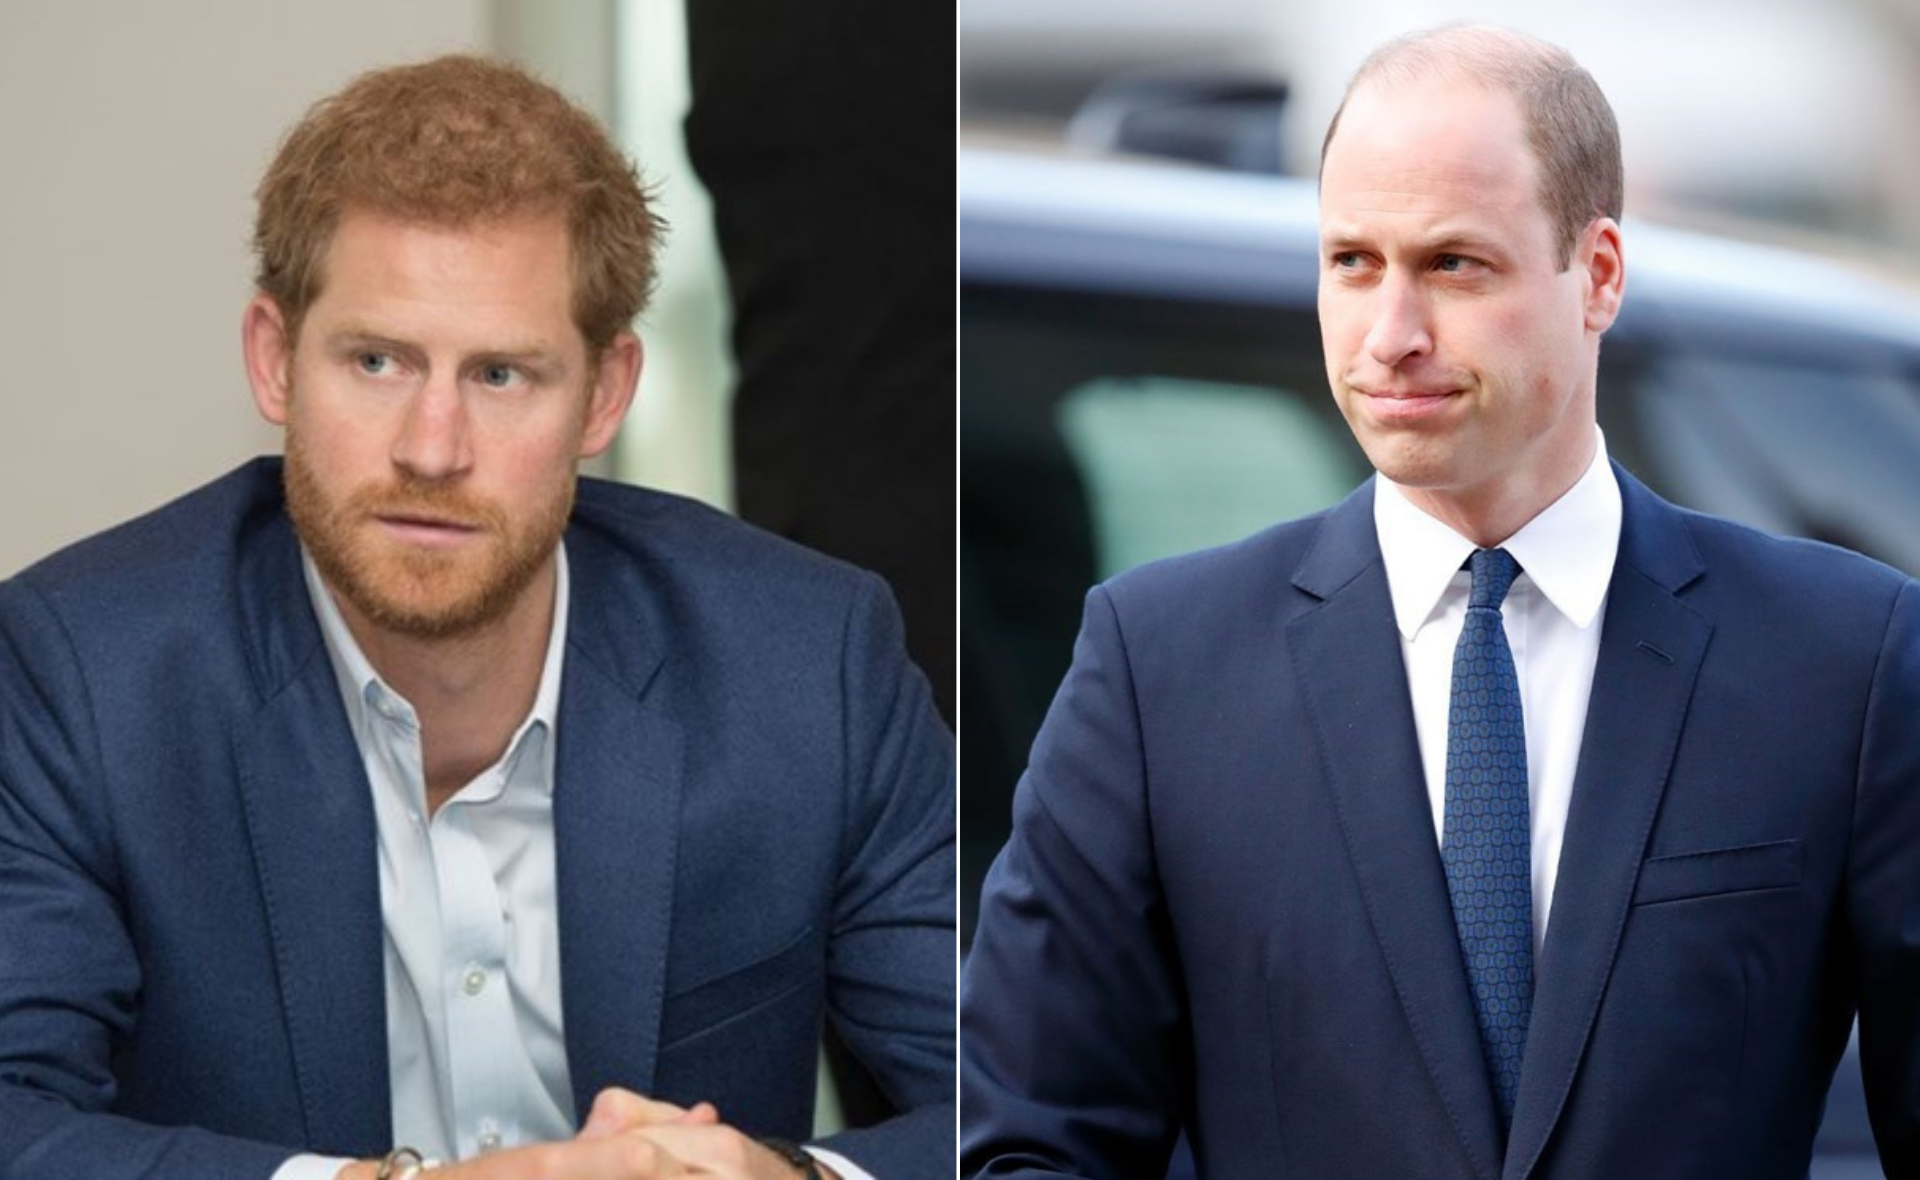 Prince William and Prince Harry have shared scathing statements criticising the BBC’s “deceit” over their Panorama interview with Princess Diana